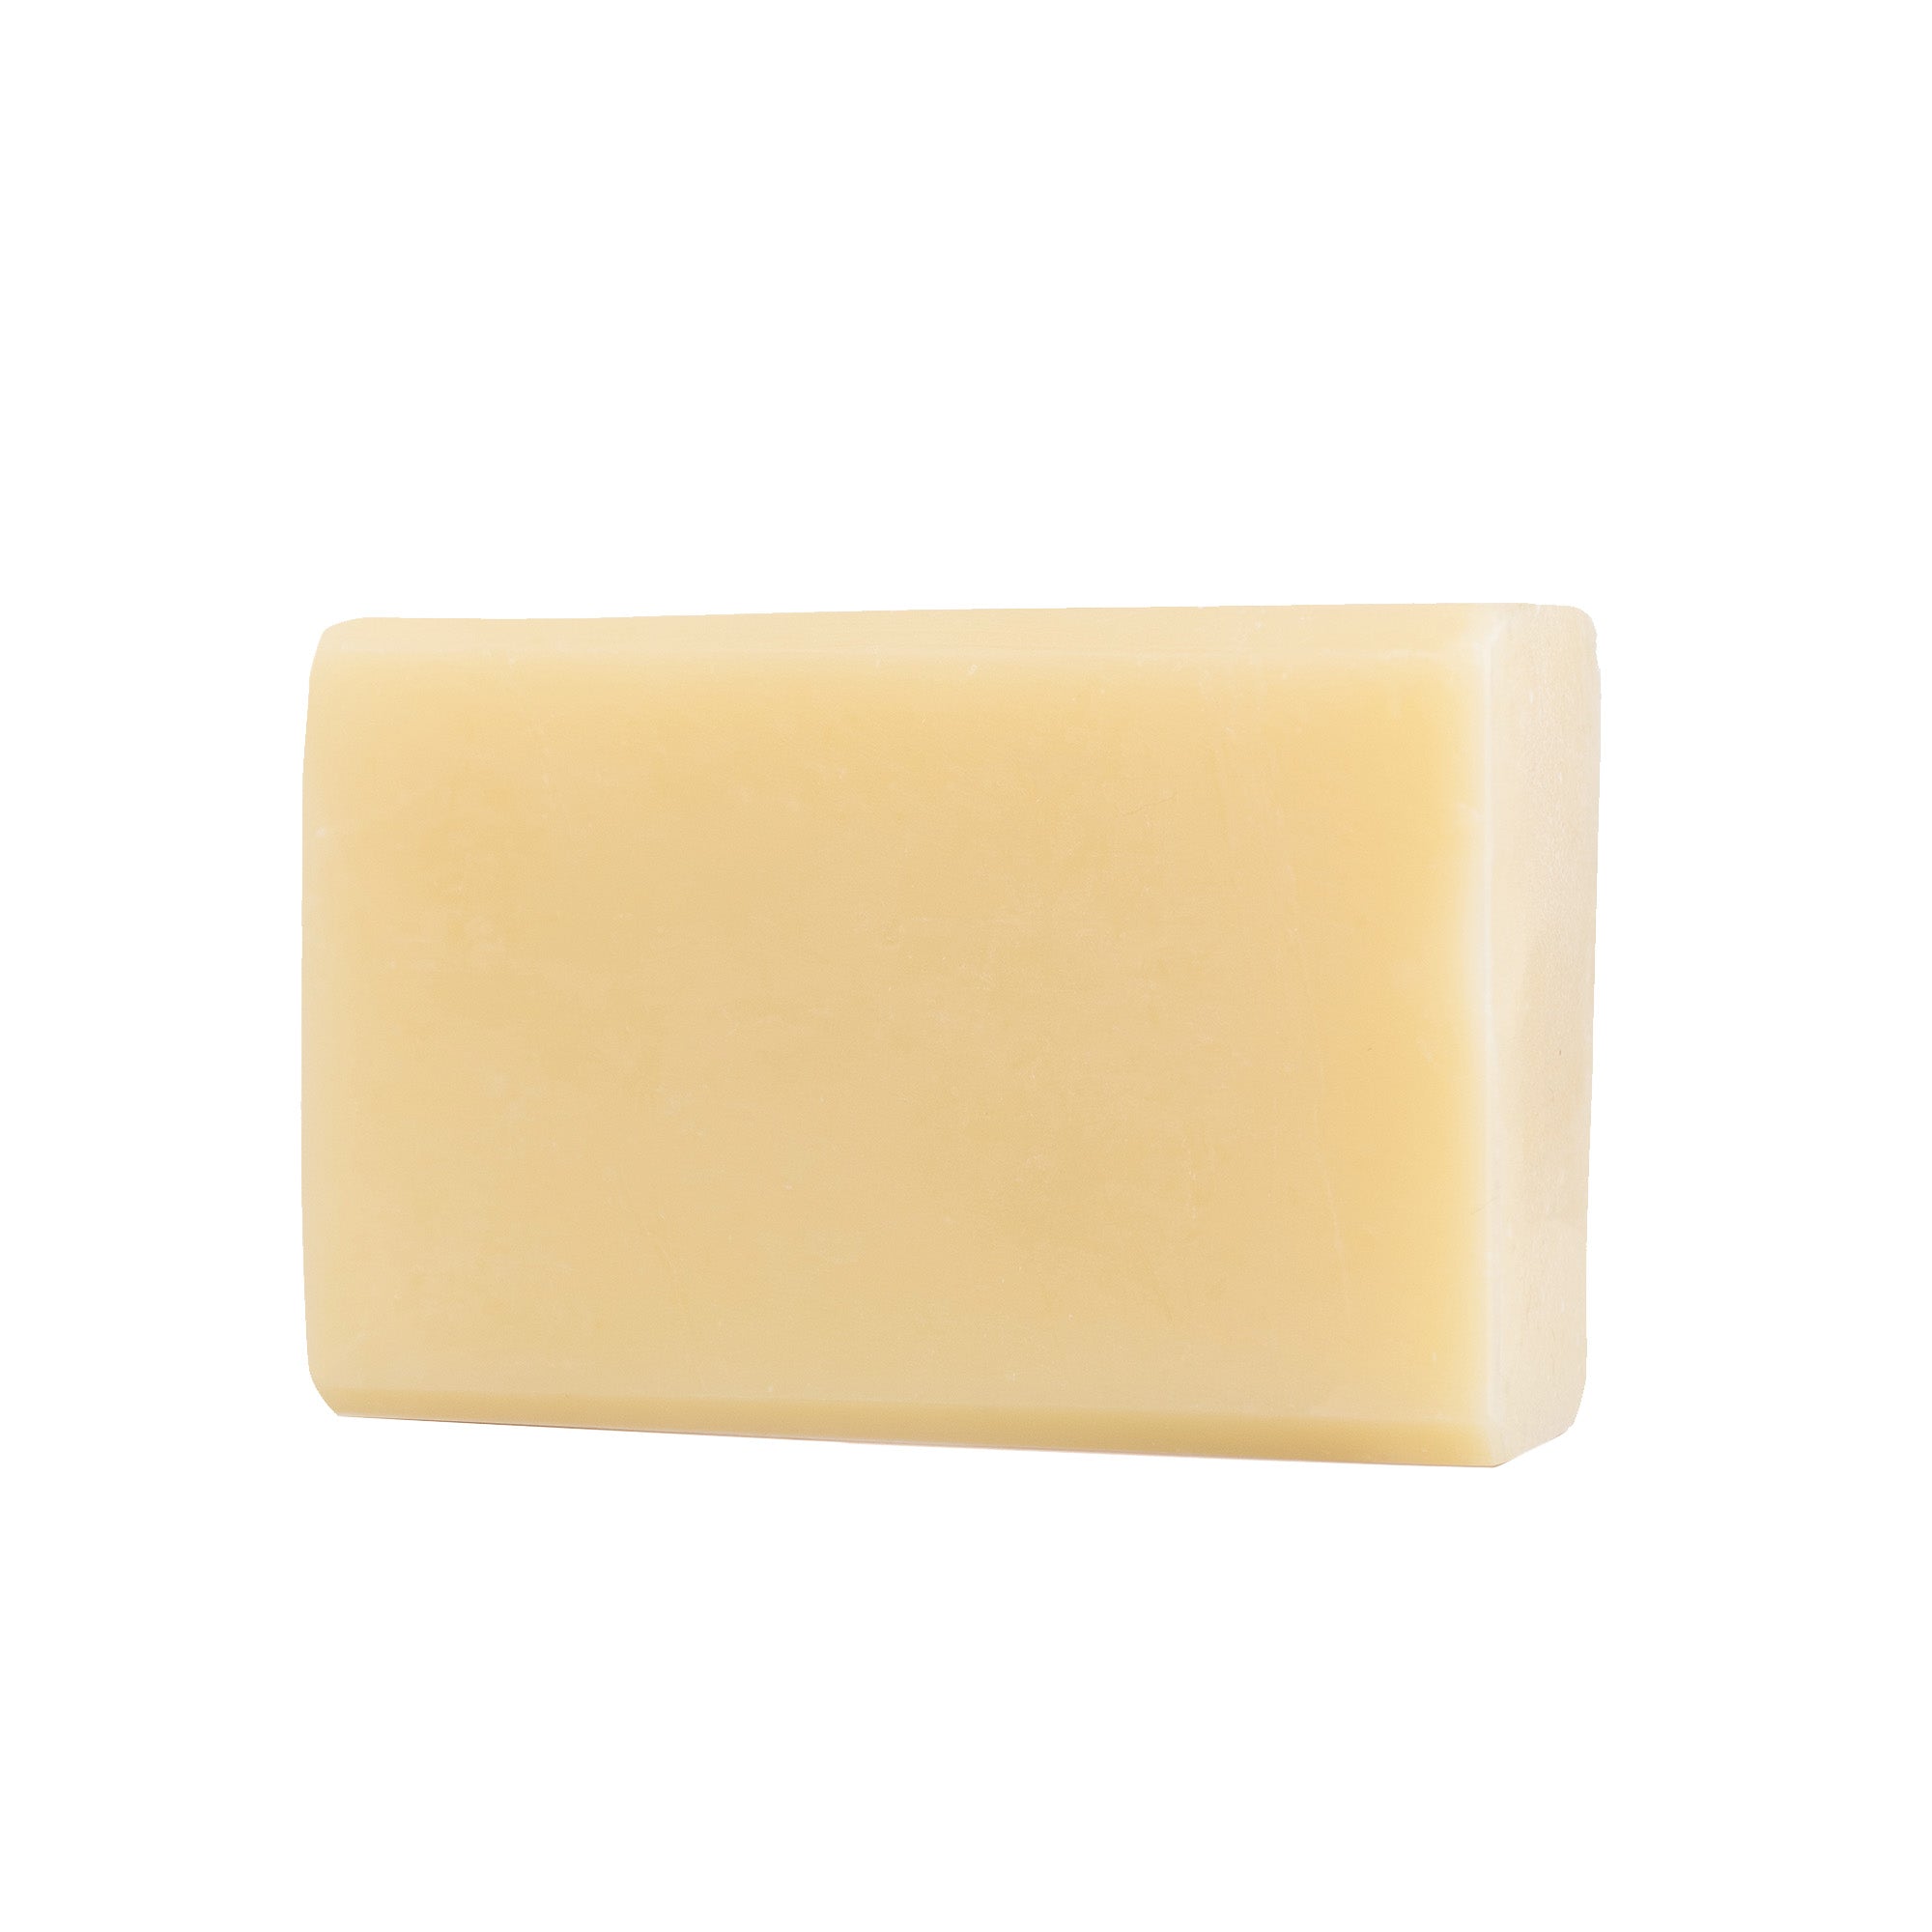 Image of a bar of Refreshing bar of soap.